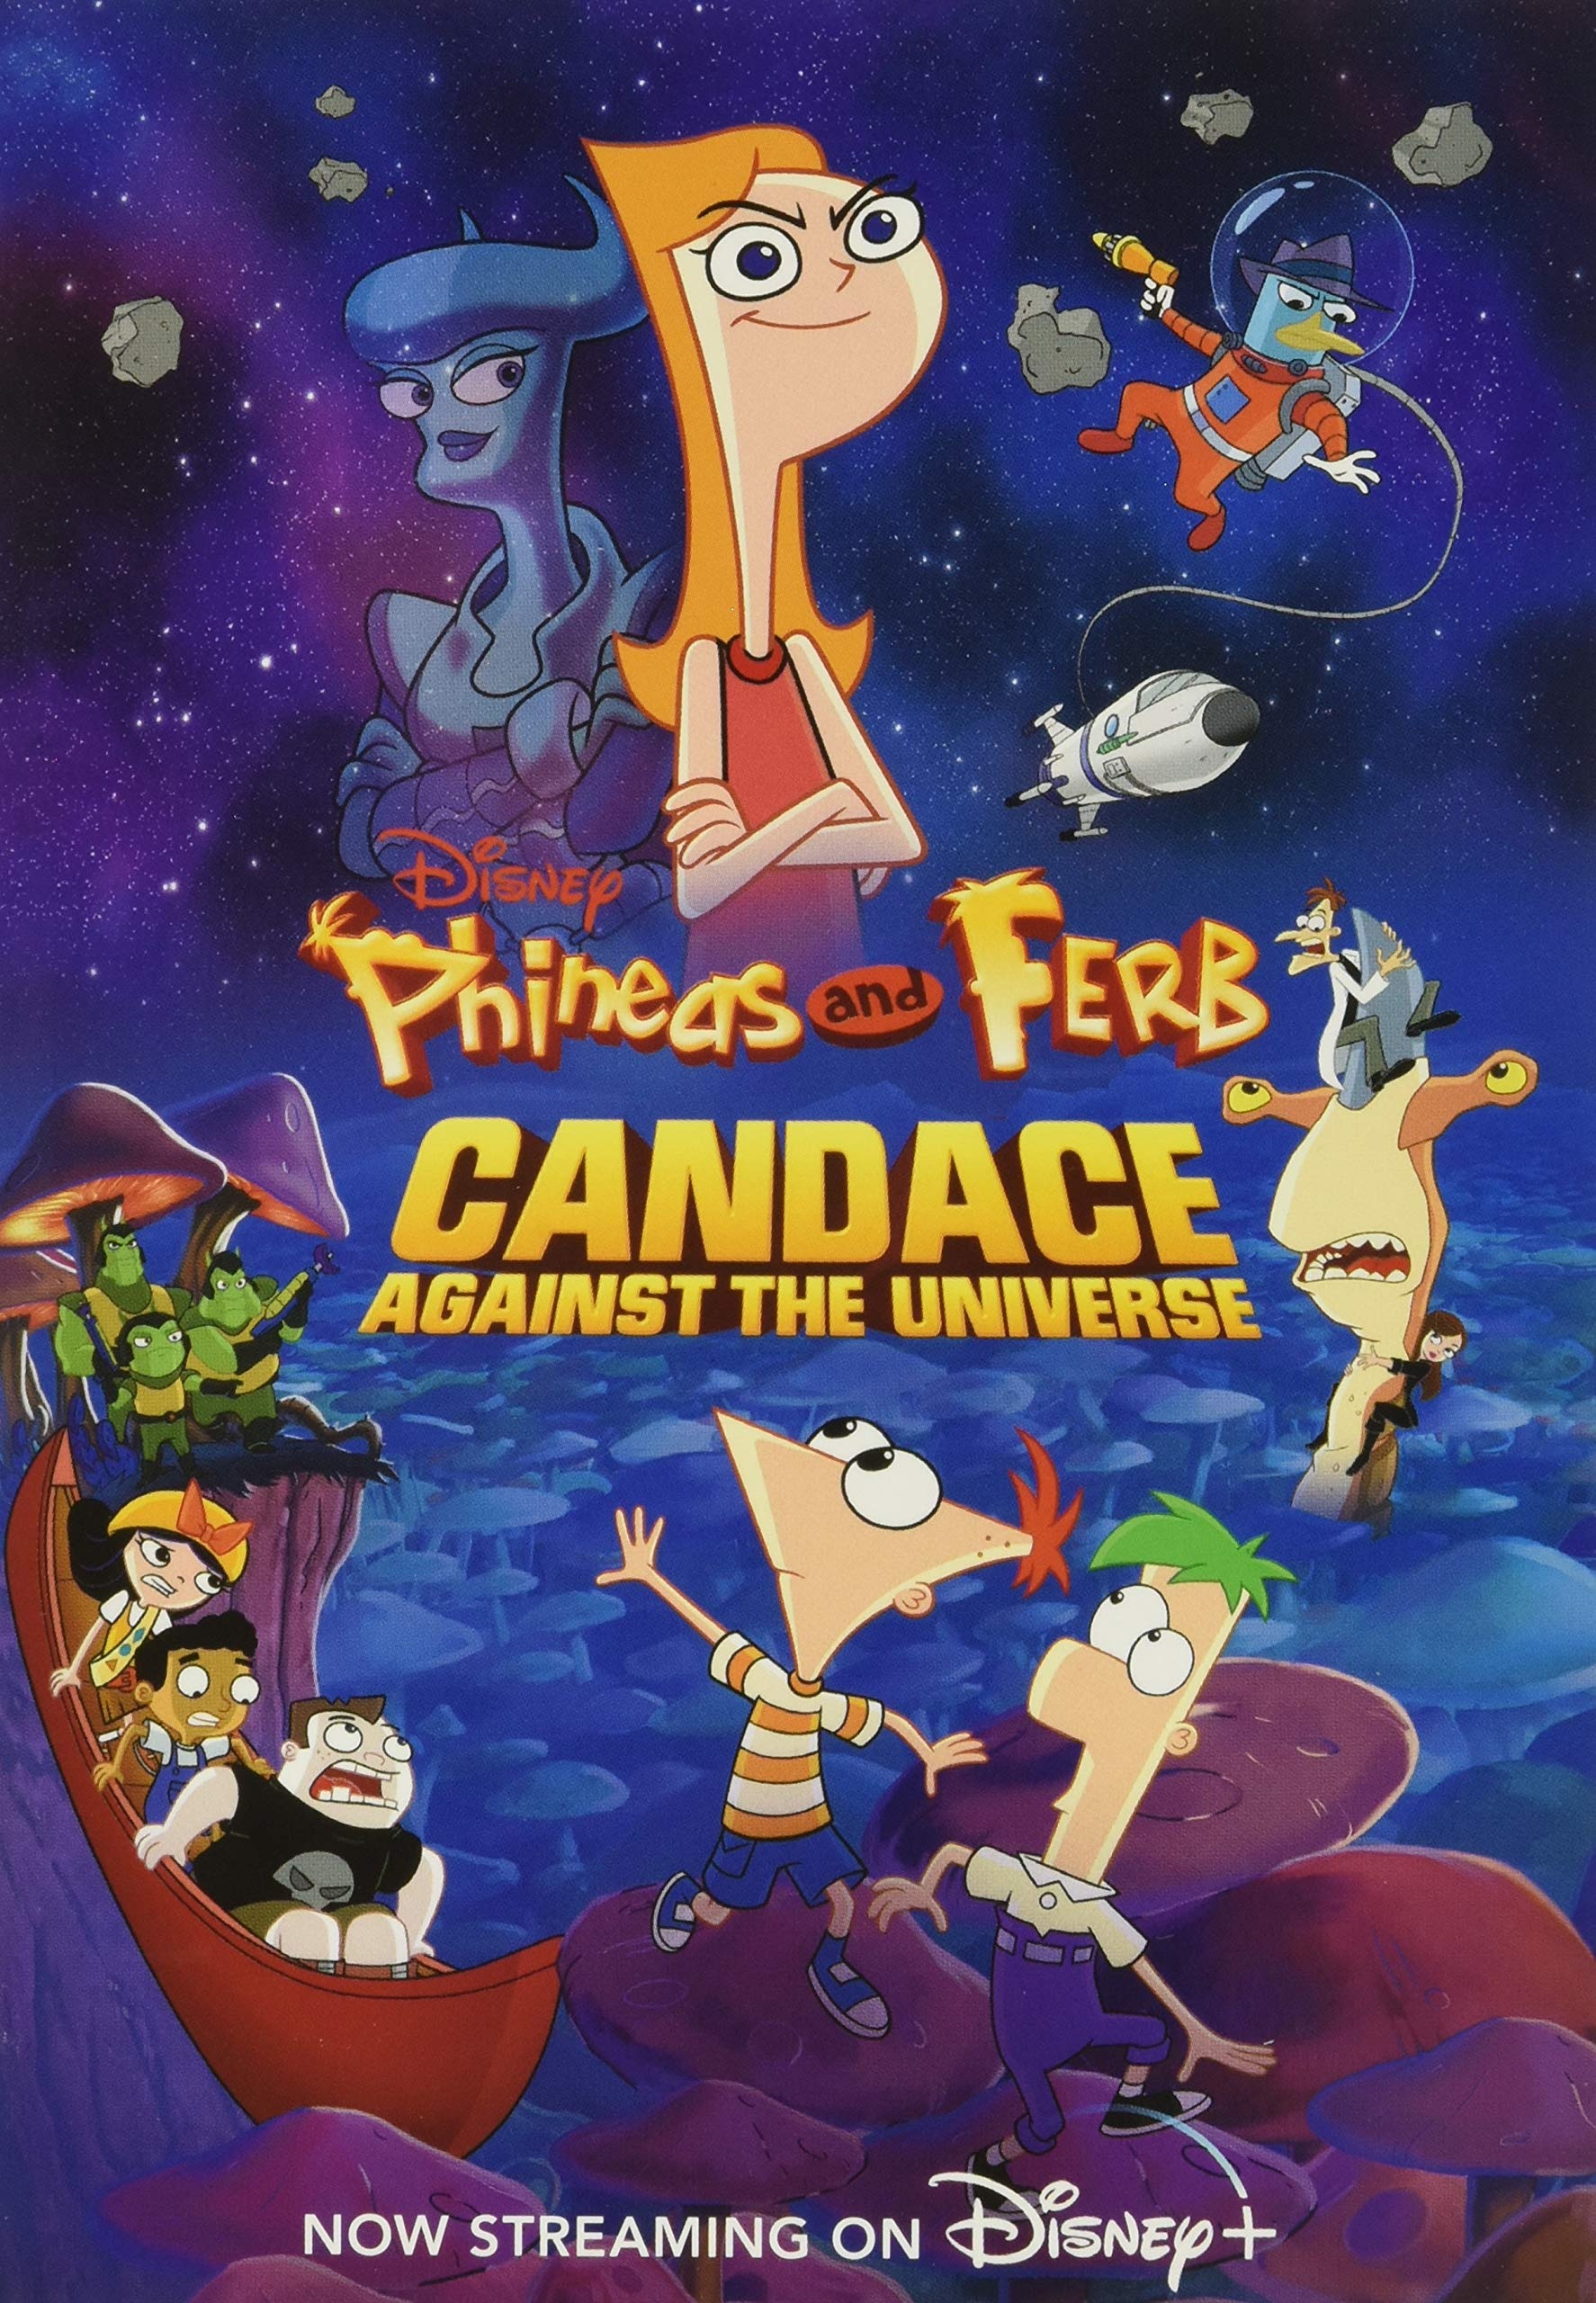 Phineas and Ferb, Candace Against the Universe, Disney books, Disney storybook art team, 1780x2560 HD Handy